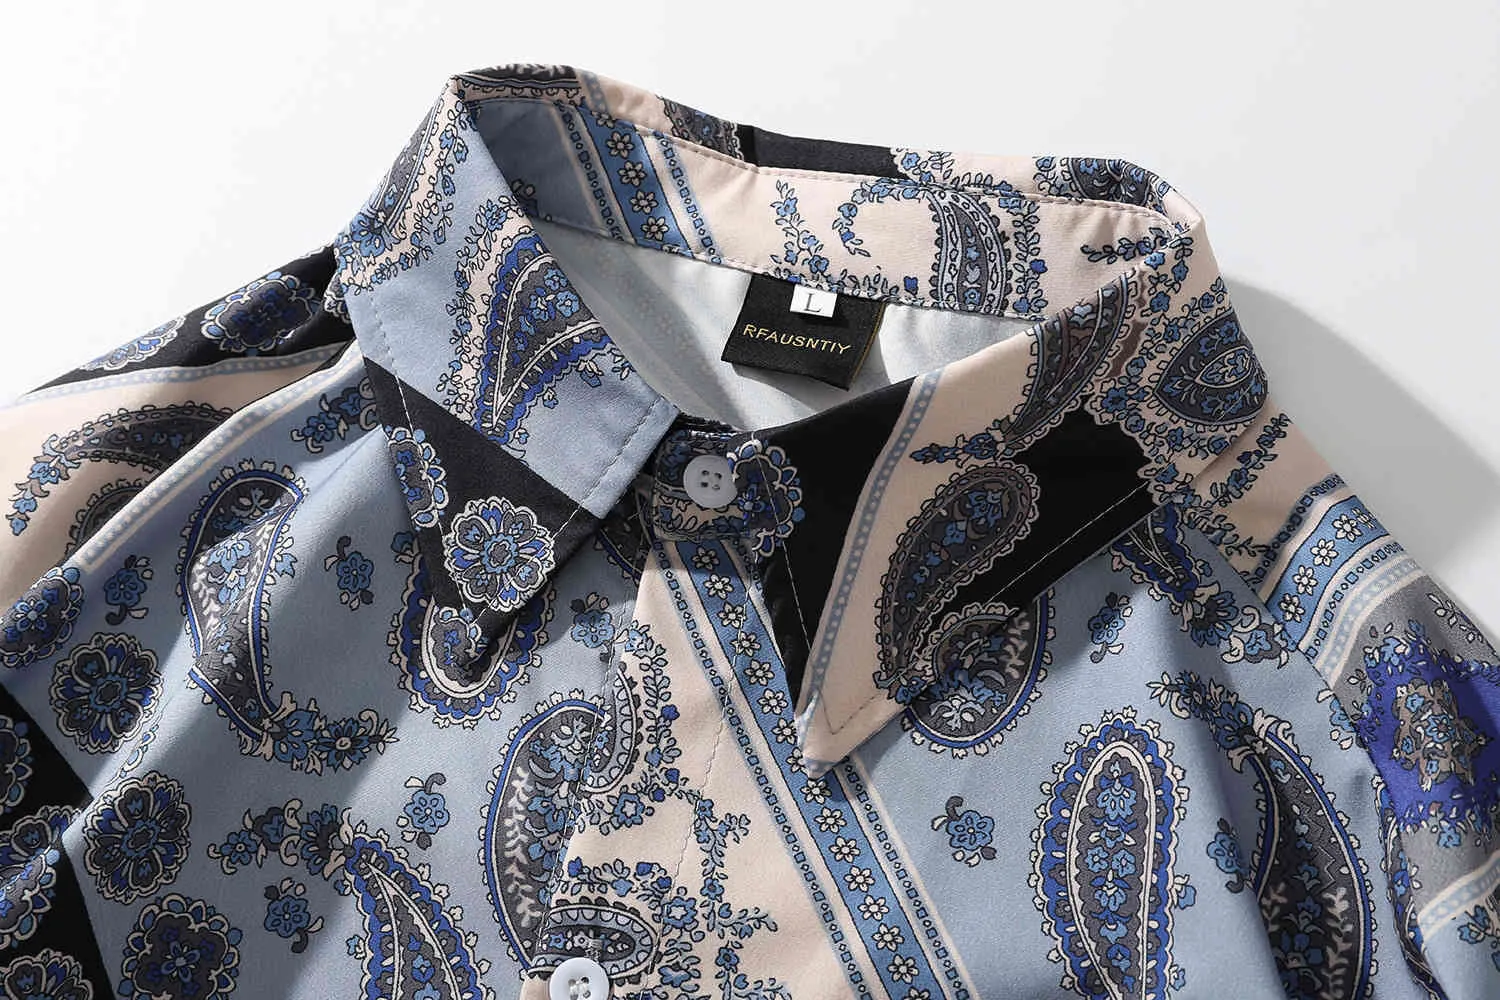 Paisley Print Shirts Mannen Lange Mouw Casual Hawaii National Style Shirt Heren Party Holiday Camisas Floral Oversized Streetwear 210524